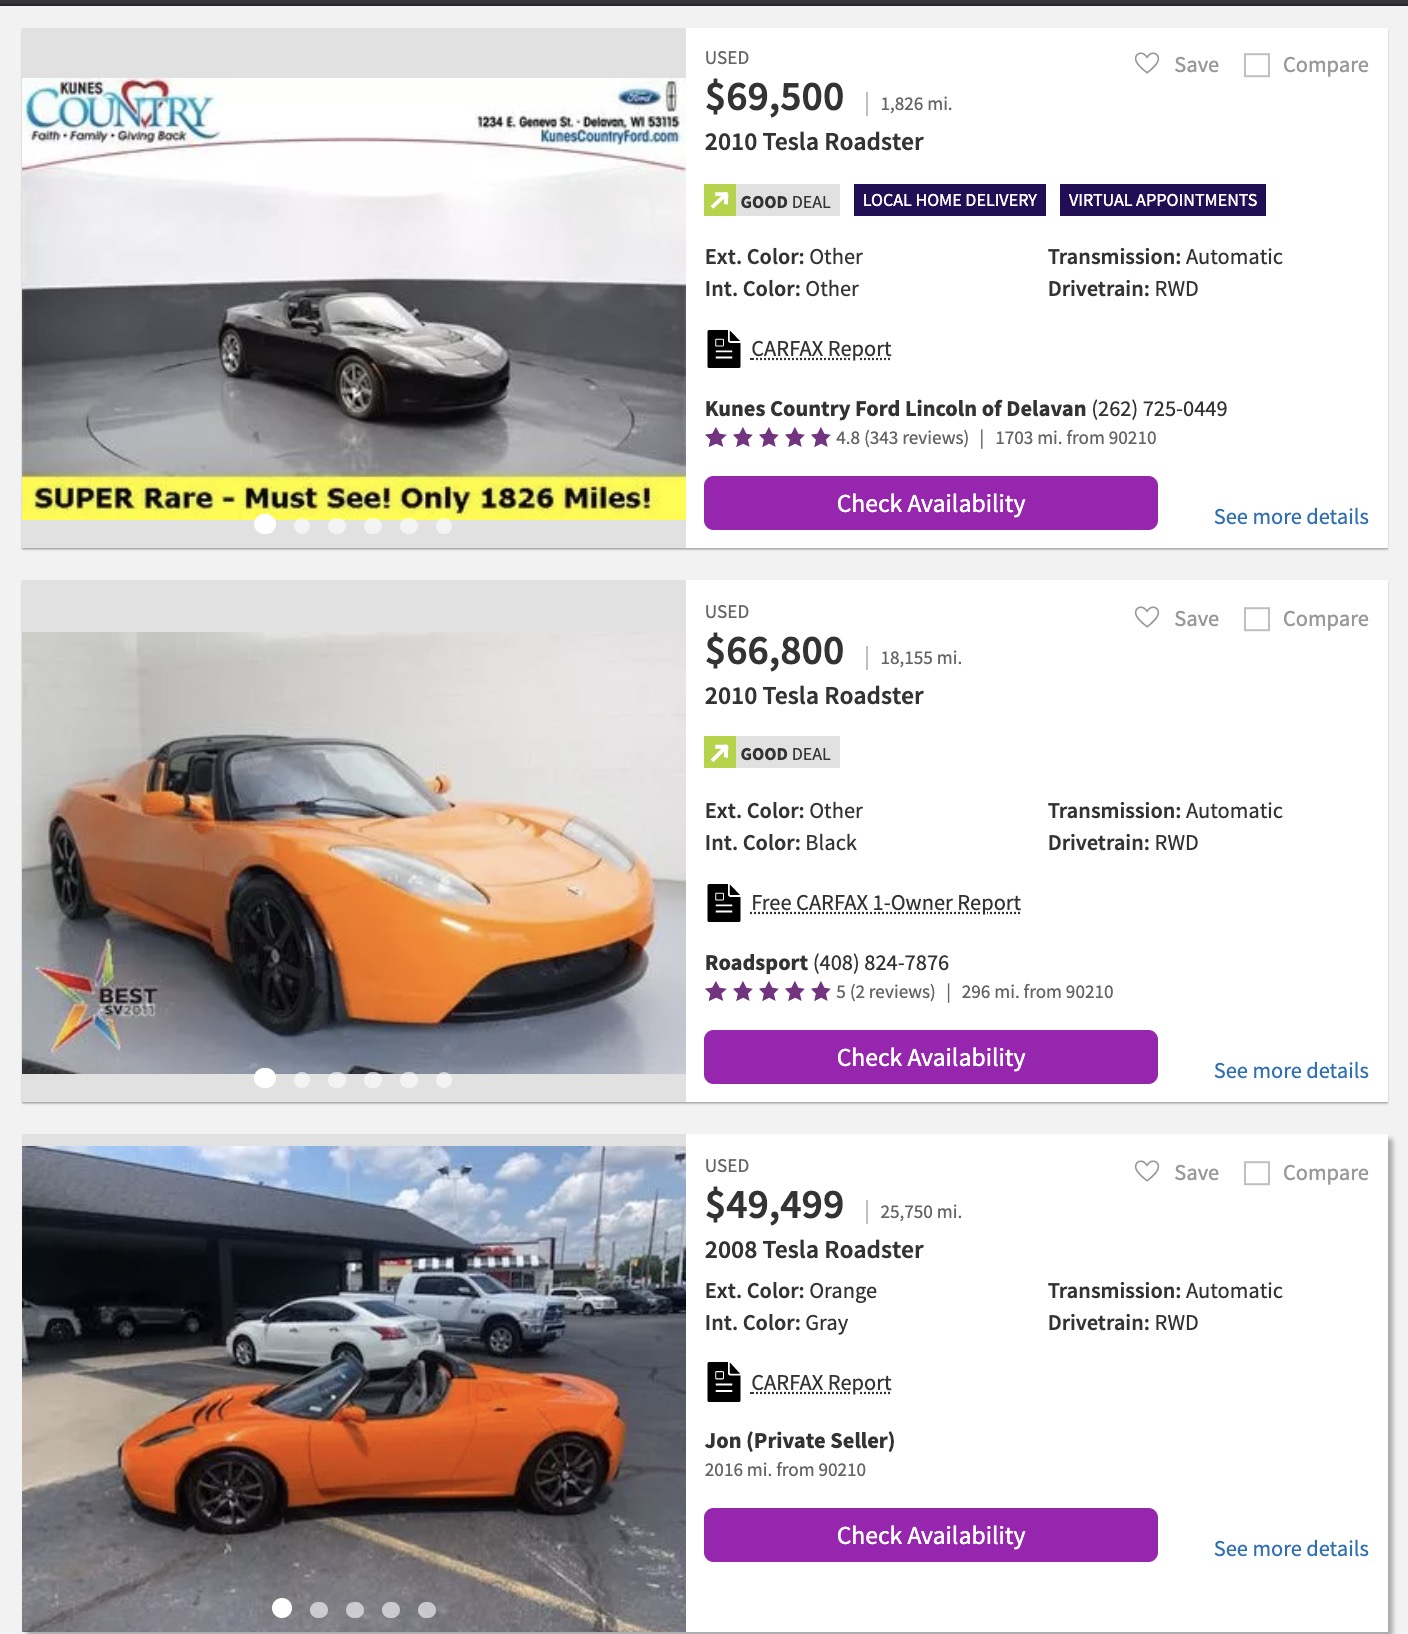 Very special Tesla Roadster goes for sale at $1.5 million asking price - Electrek